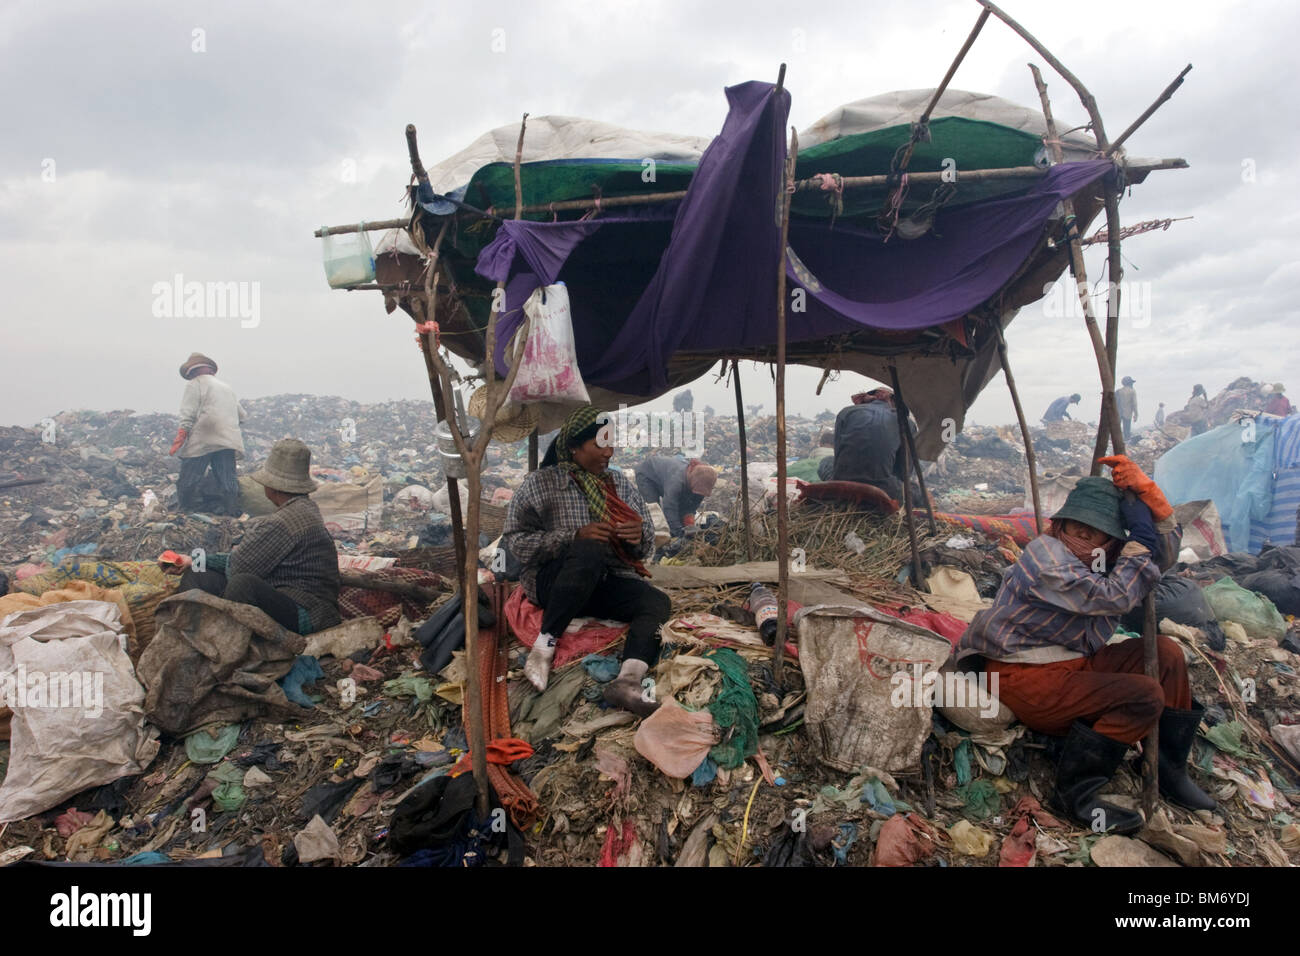 women sitting in a temporary shelter at the garbage dump in Phnom Penh, Cambodia. Stock Photo